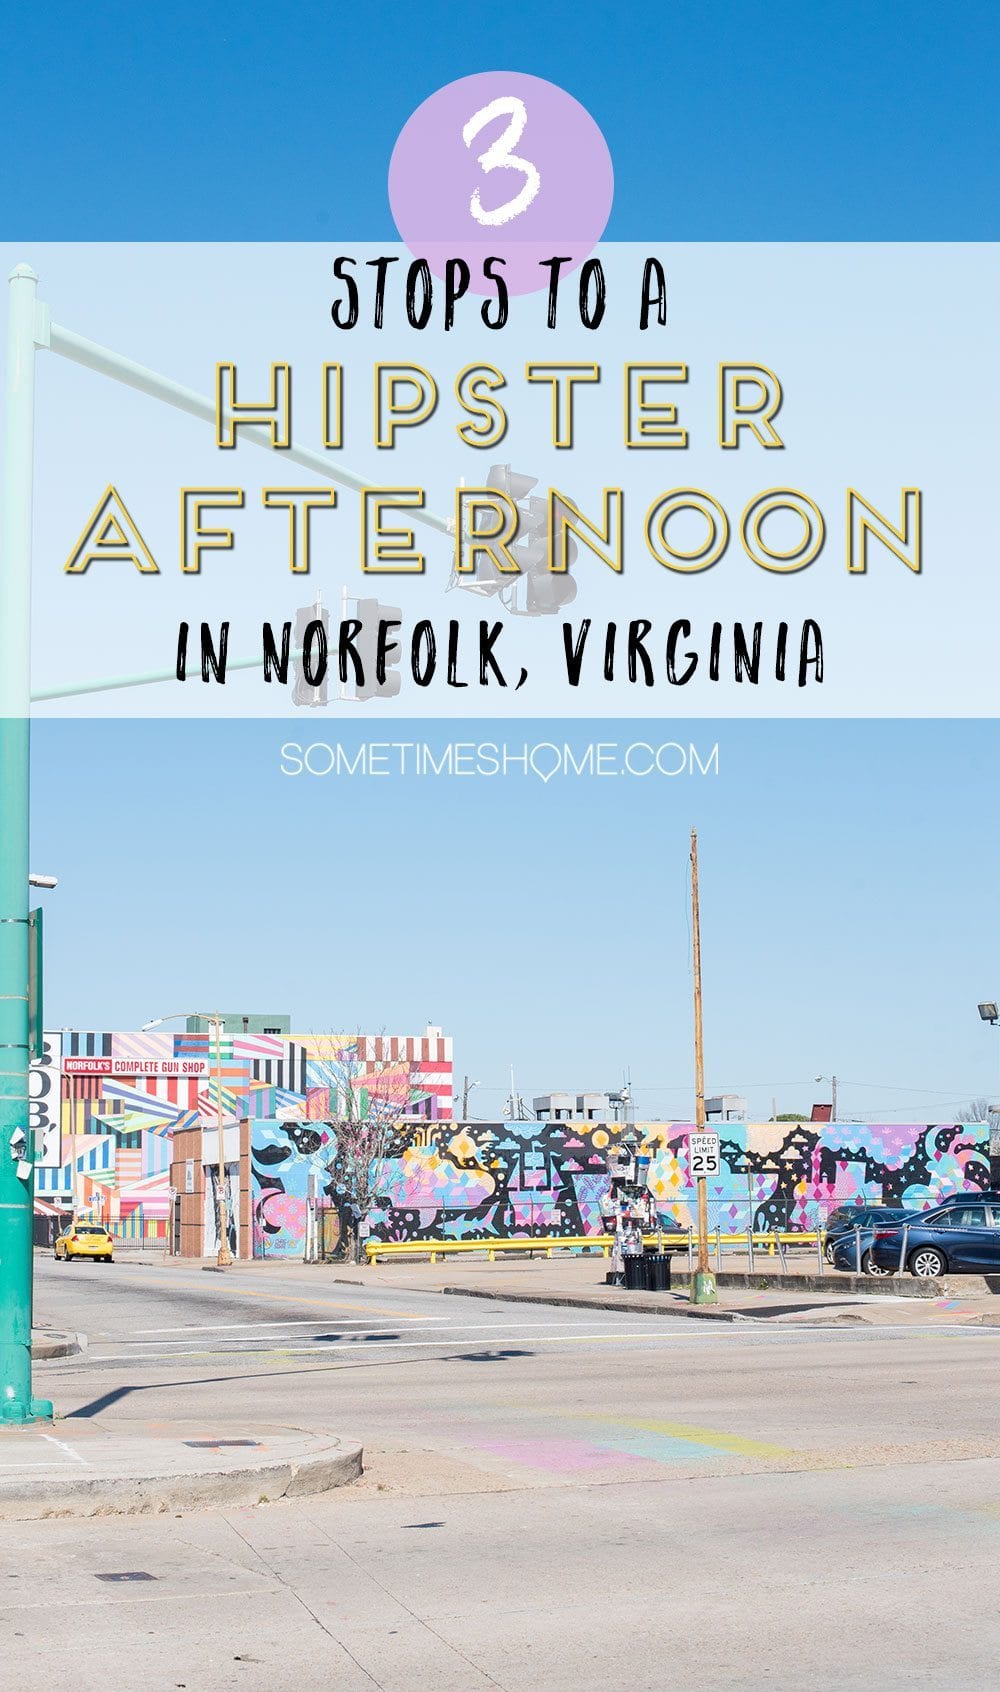 3 Stops to a Hipster Afternoon in Norfolk Virginia. Sometimes Home travel blog. Post with murals and street art to visit, a print shop and beer bottle shop stop.